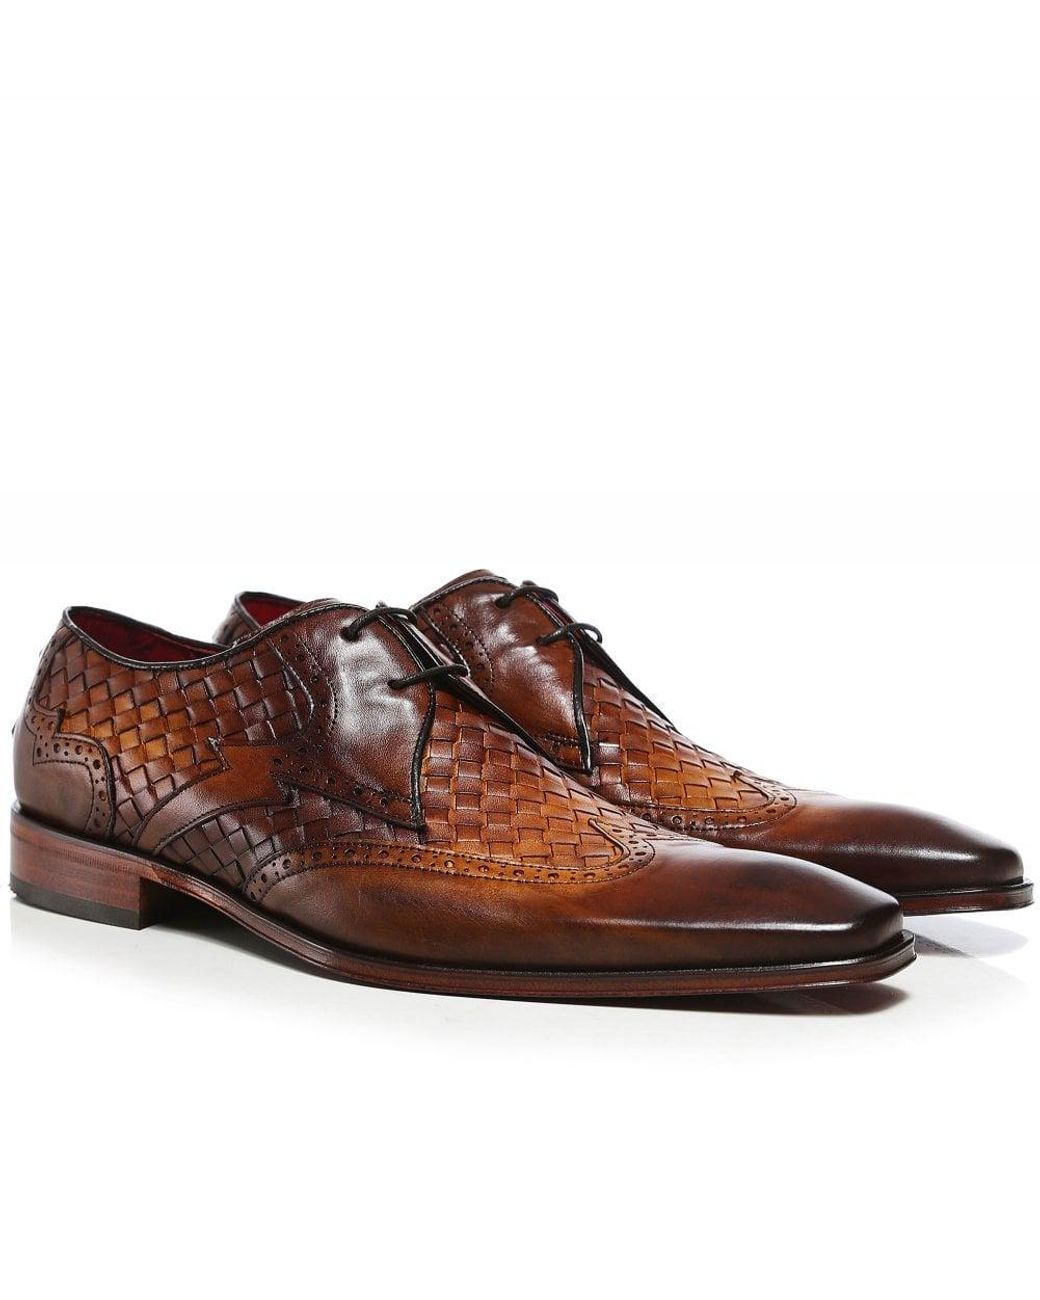 Jeffery West Woven Leather Wing-tip Scarface Shoes in Brown for Men - Lyst